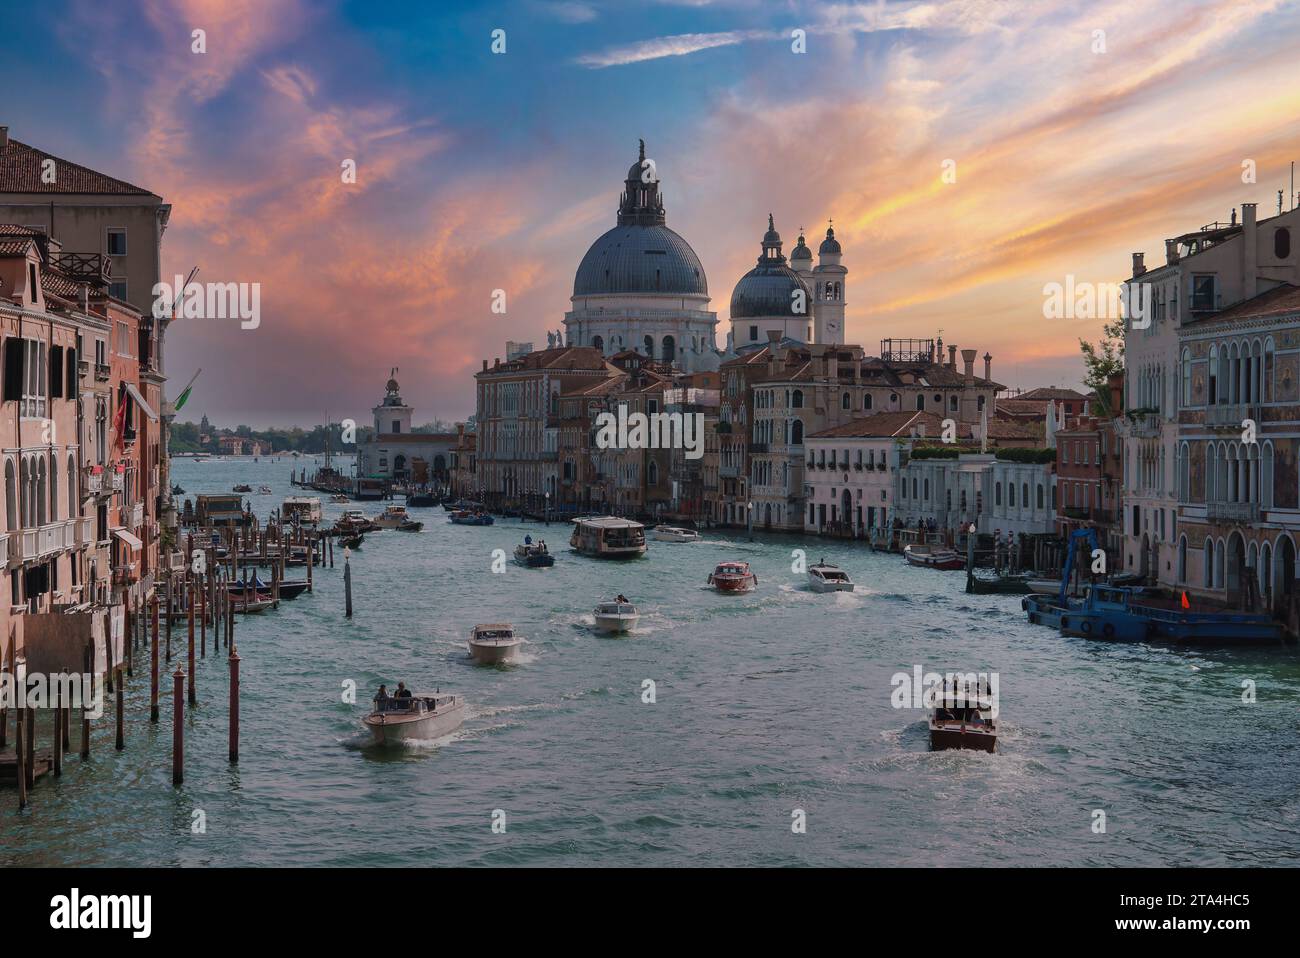 Grand Canal Venice Italy Afternoon View with Renaissance and Baroque Architecture Stock Photo